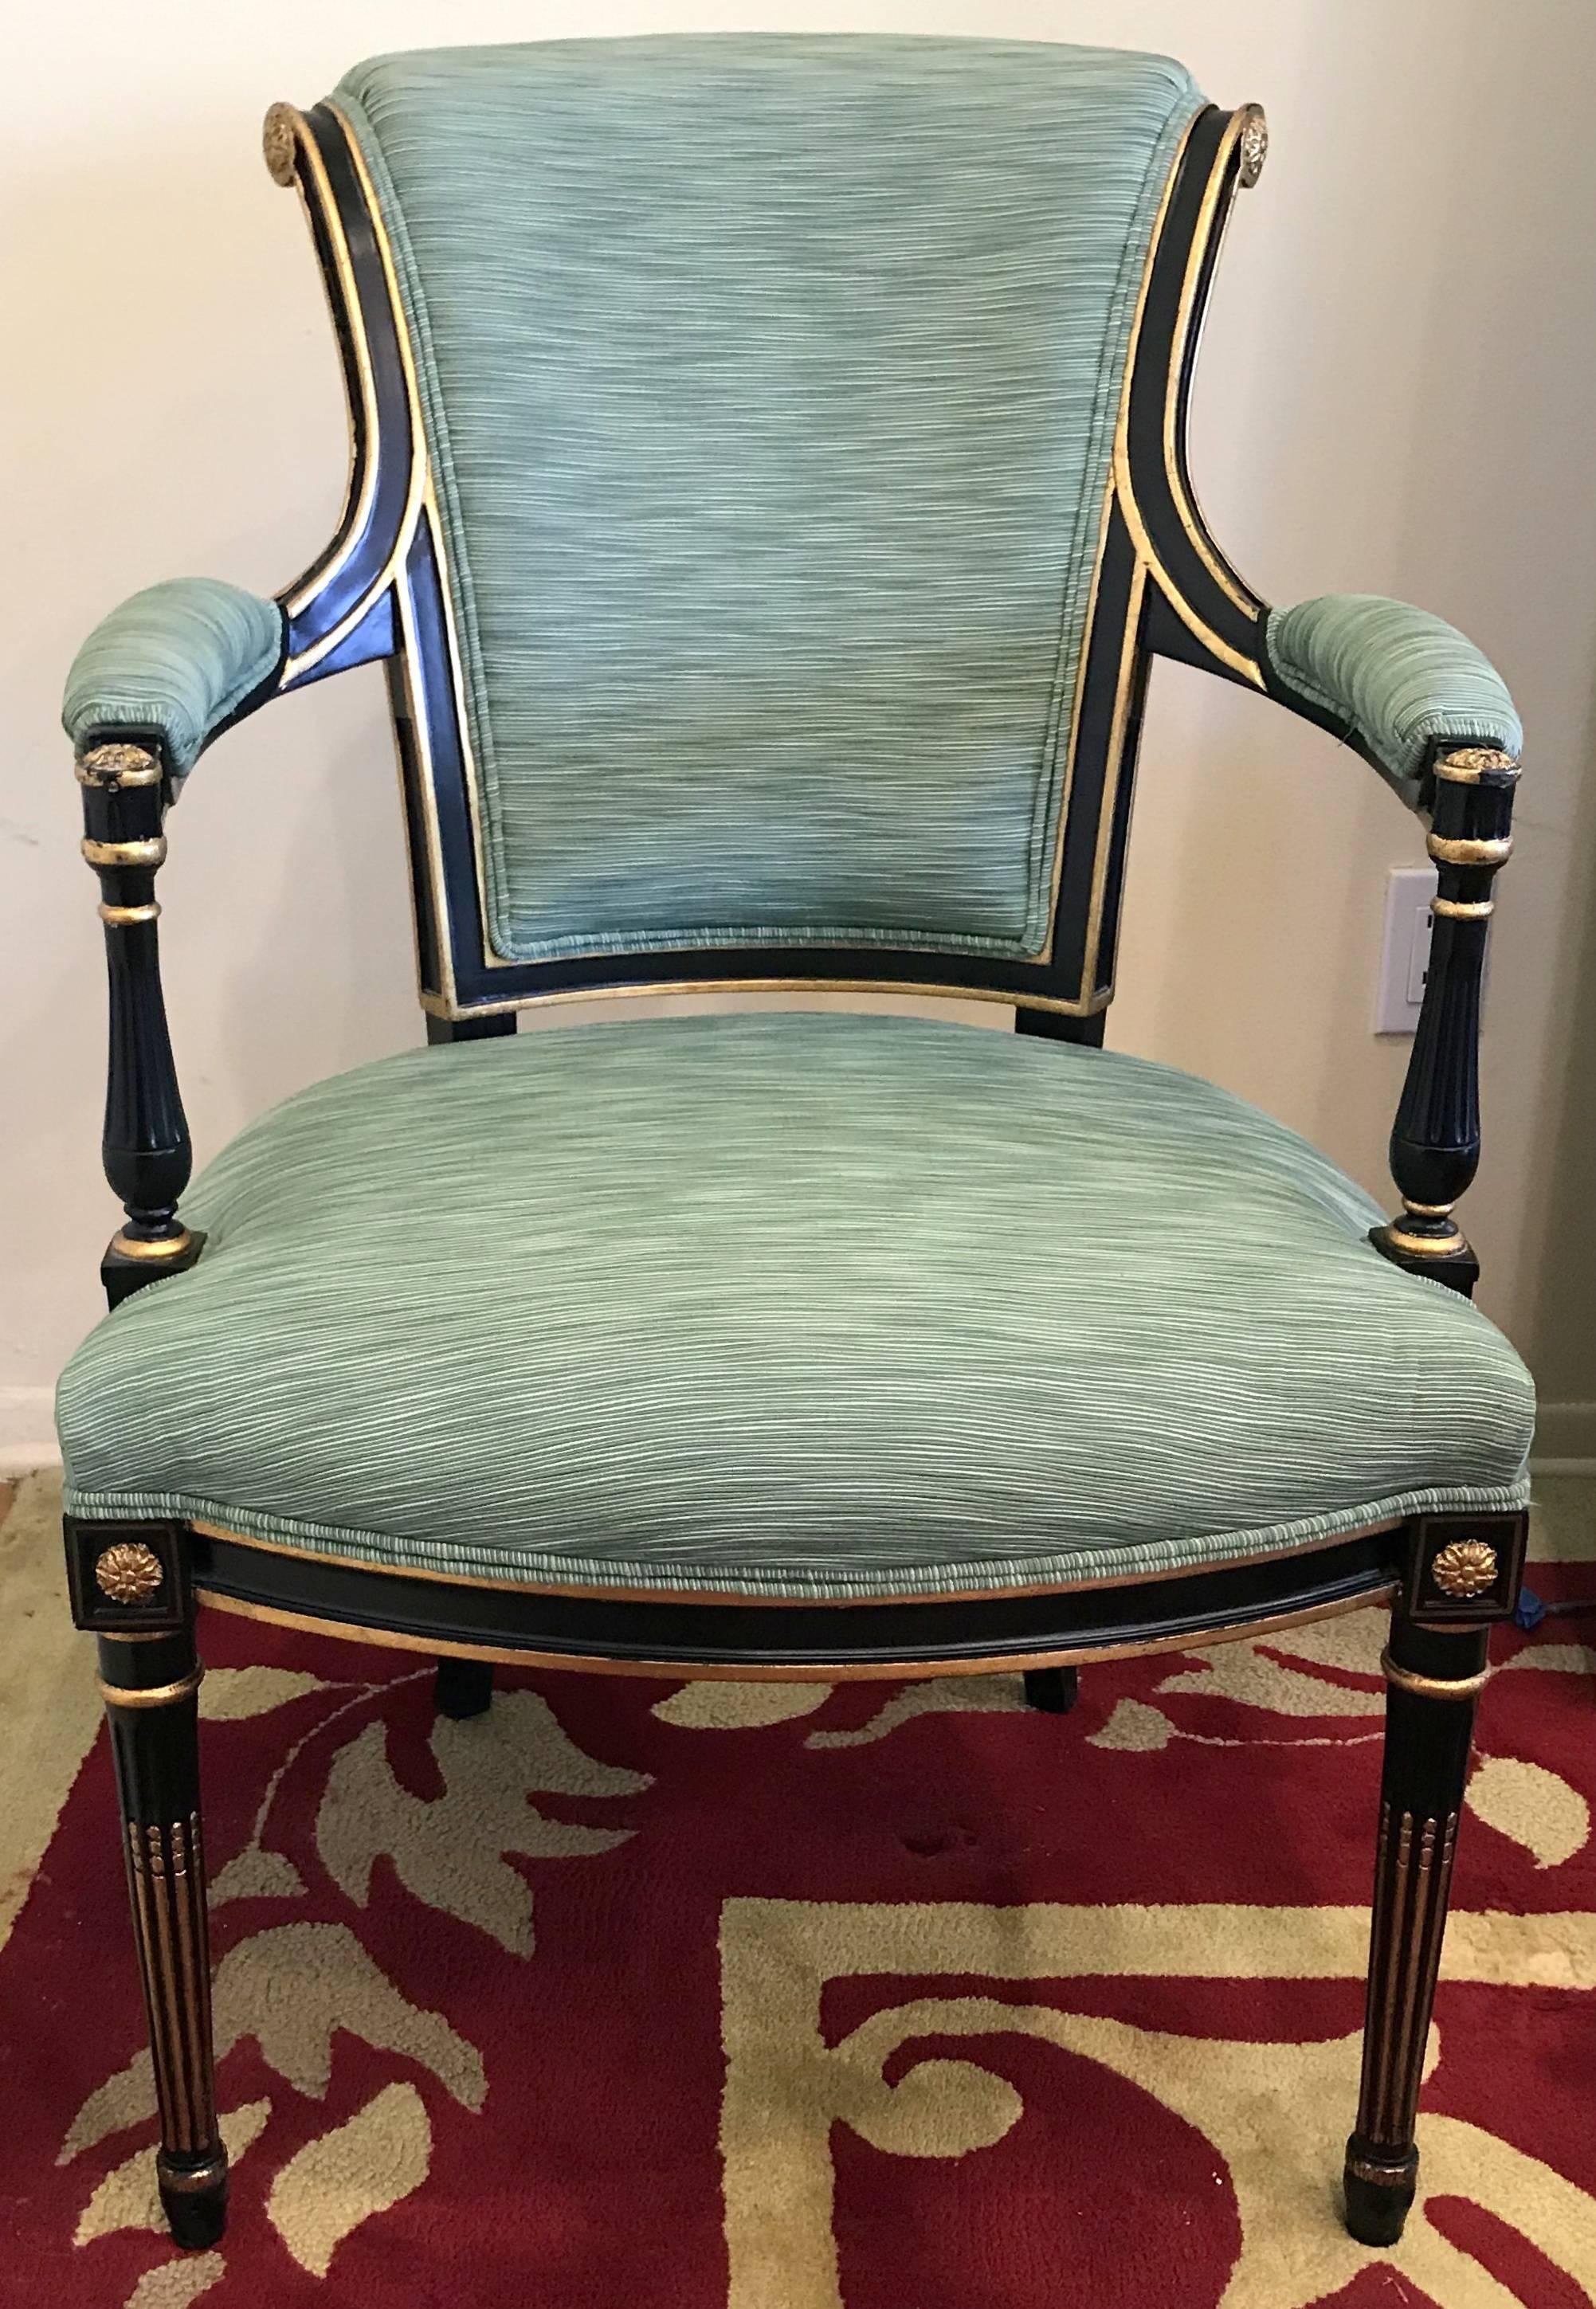 A wonderful set of 12 Regency or neoclassical black lacquered and gold gilt dining room chairs consisting of two armchairs and ten side chairs with green silk upholstery on the front and a red and white stripe on the back side of the chairs, In the